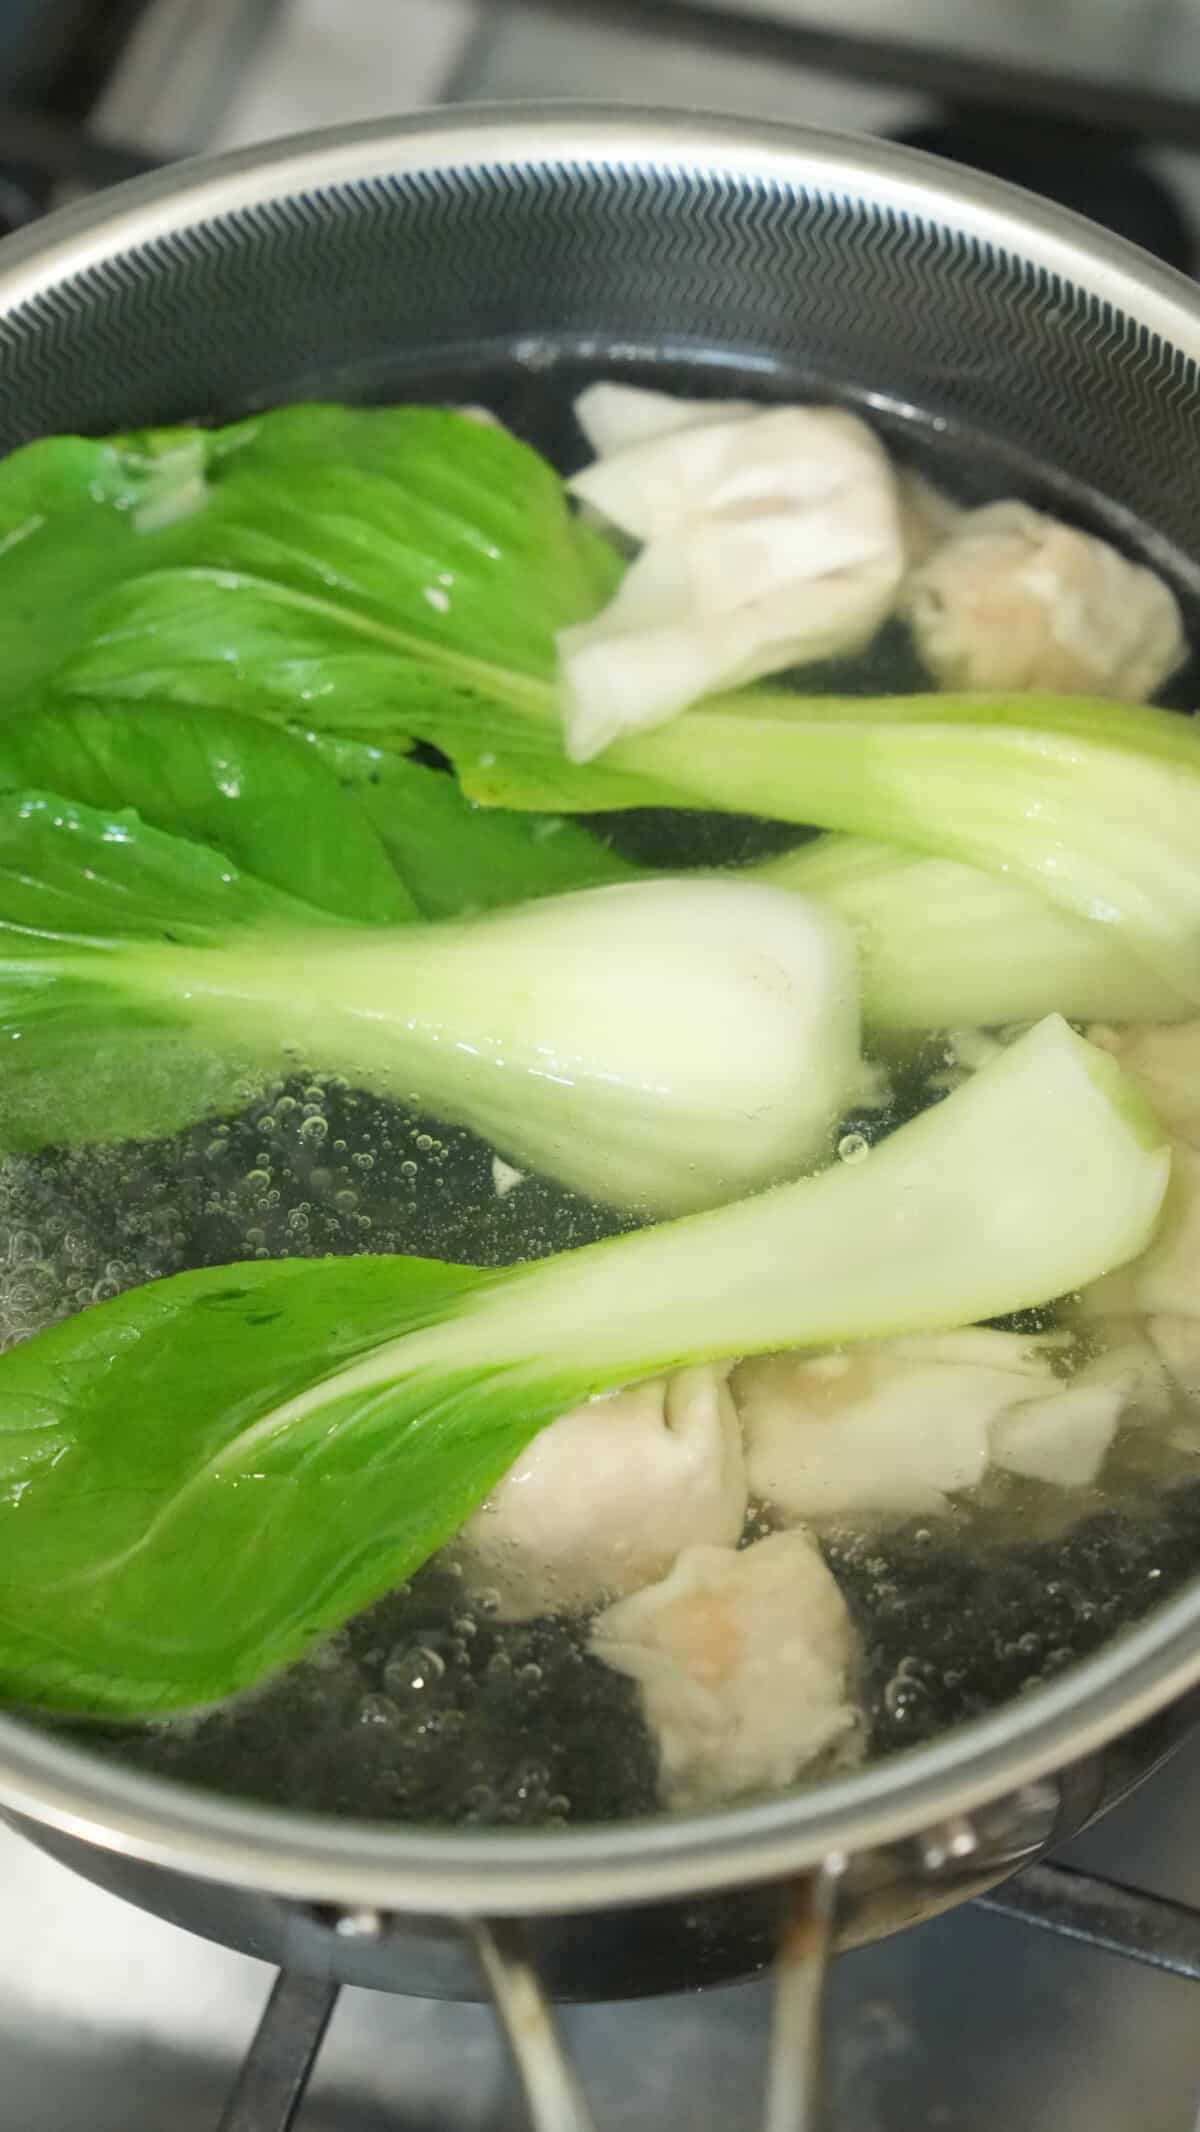 Bok choy blanching in a pot of water with wontons.